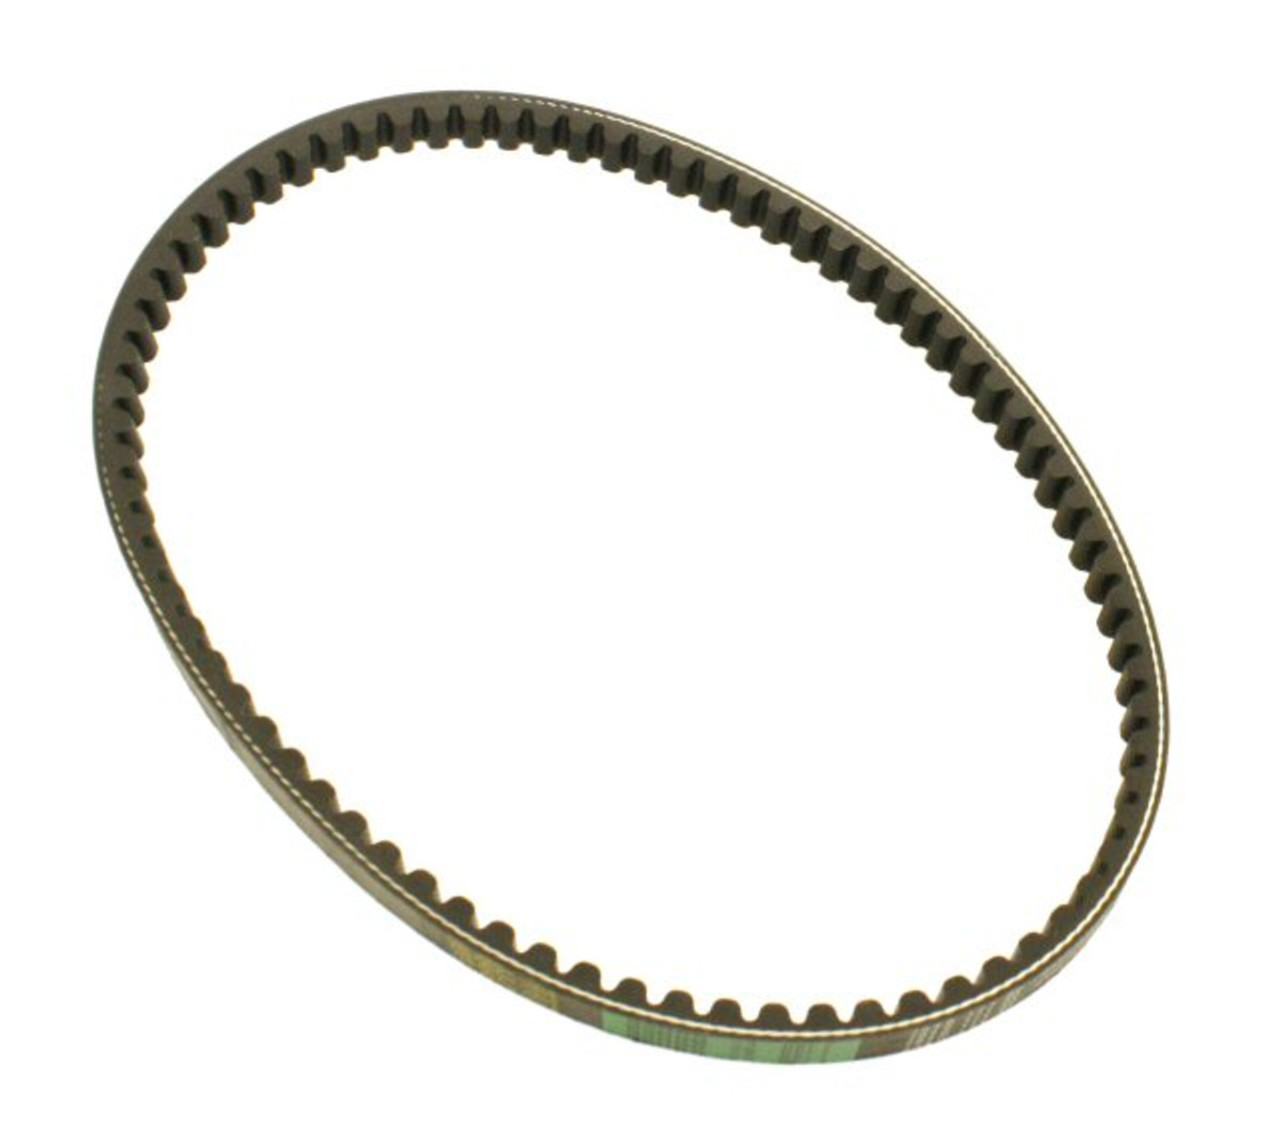 CVT DRIVE BELT 681 X 17.7 X 32 FOR CHICAGO SCOOTER COMPANY GO